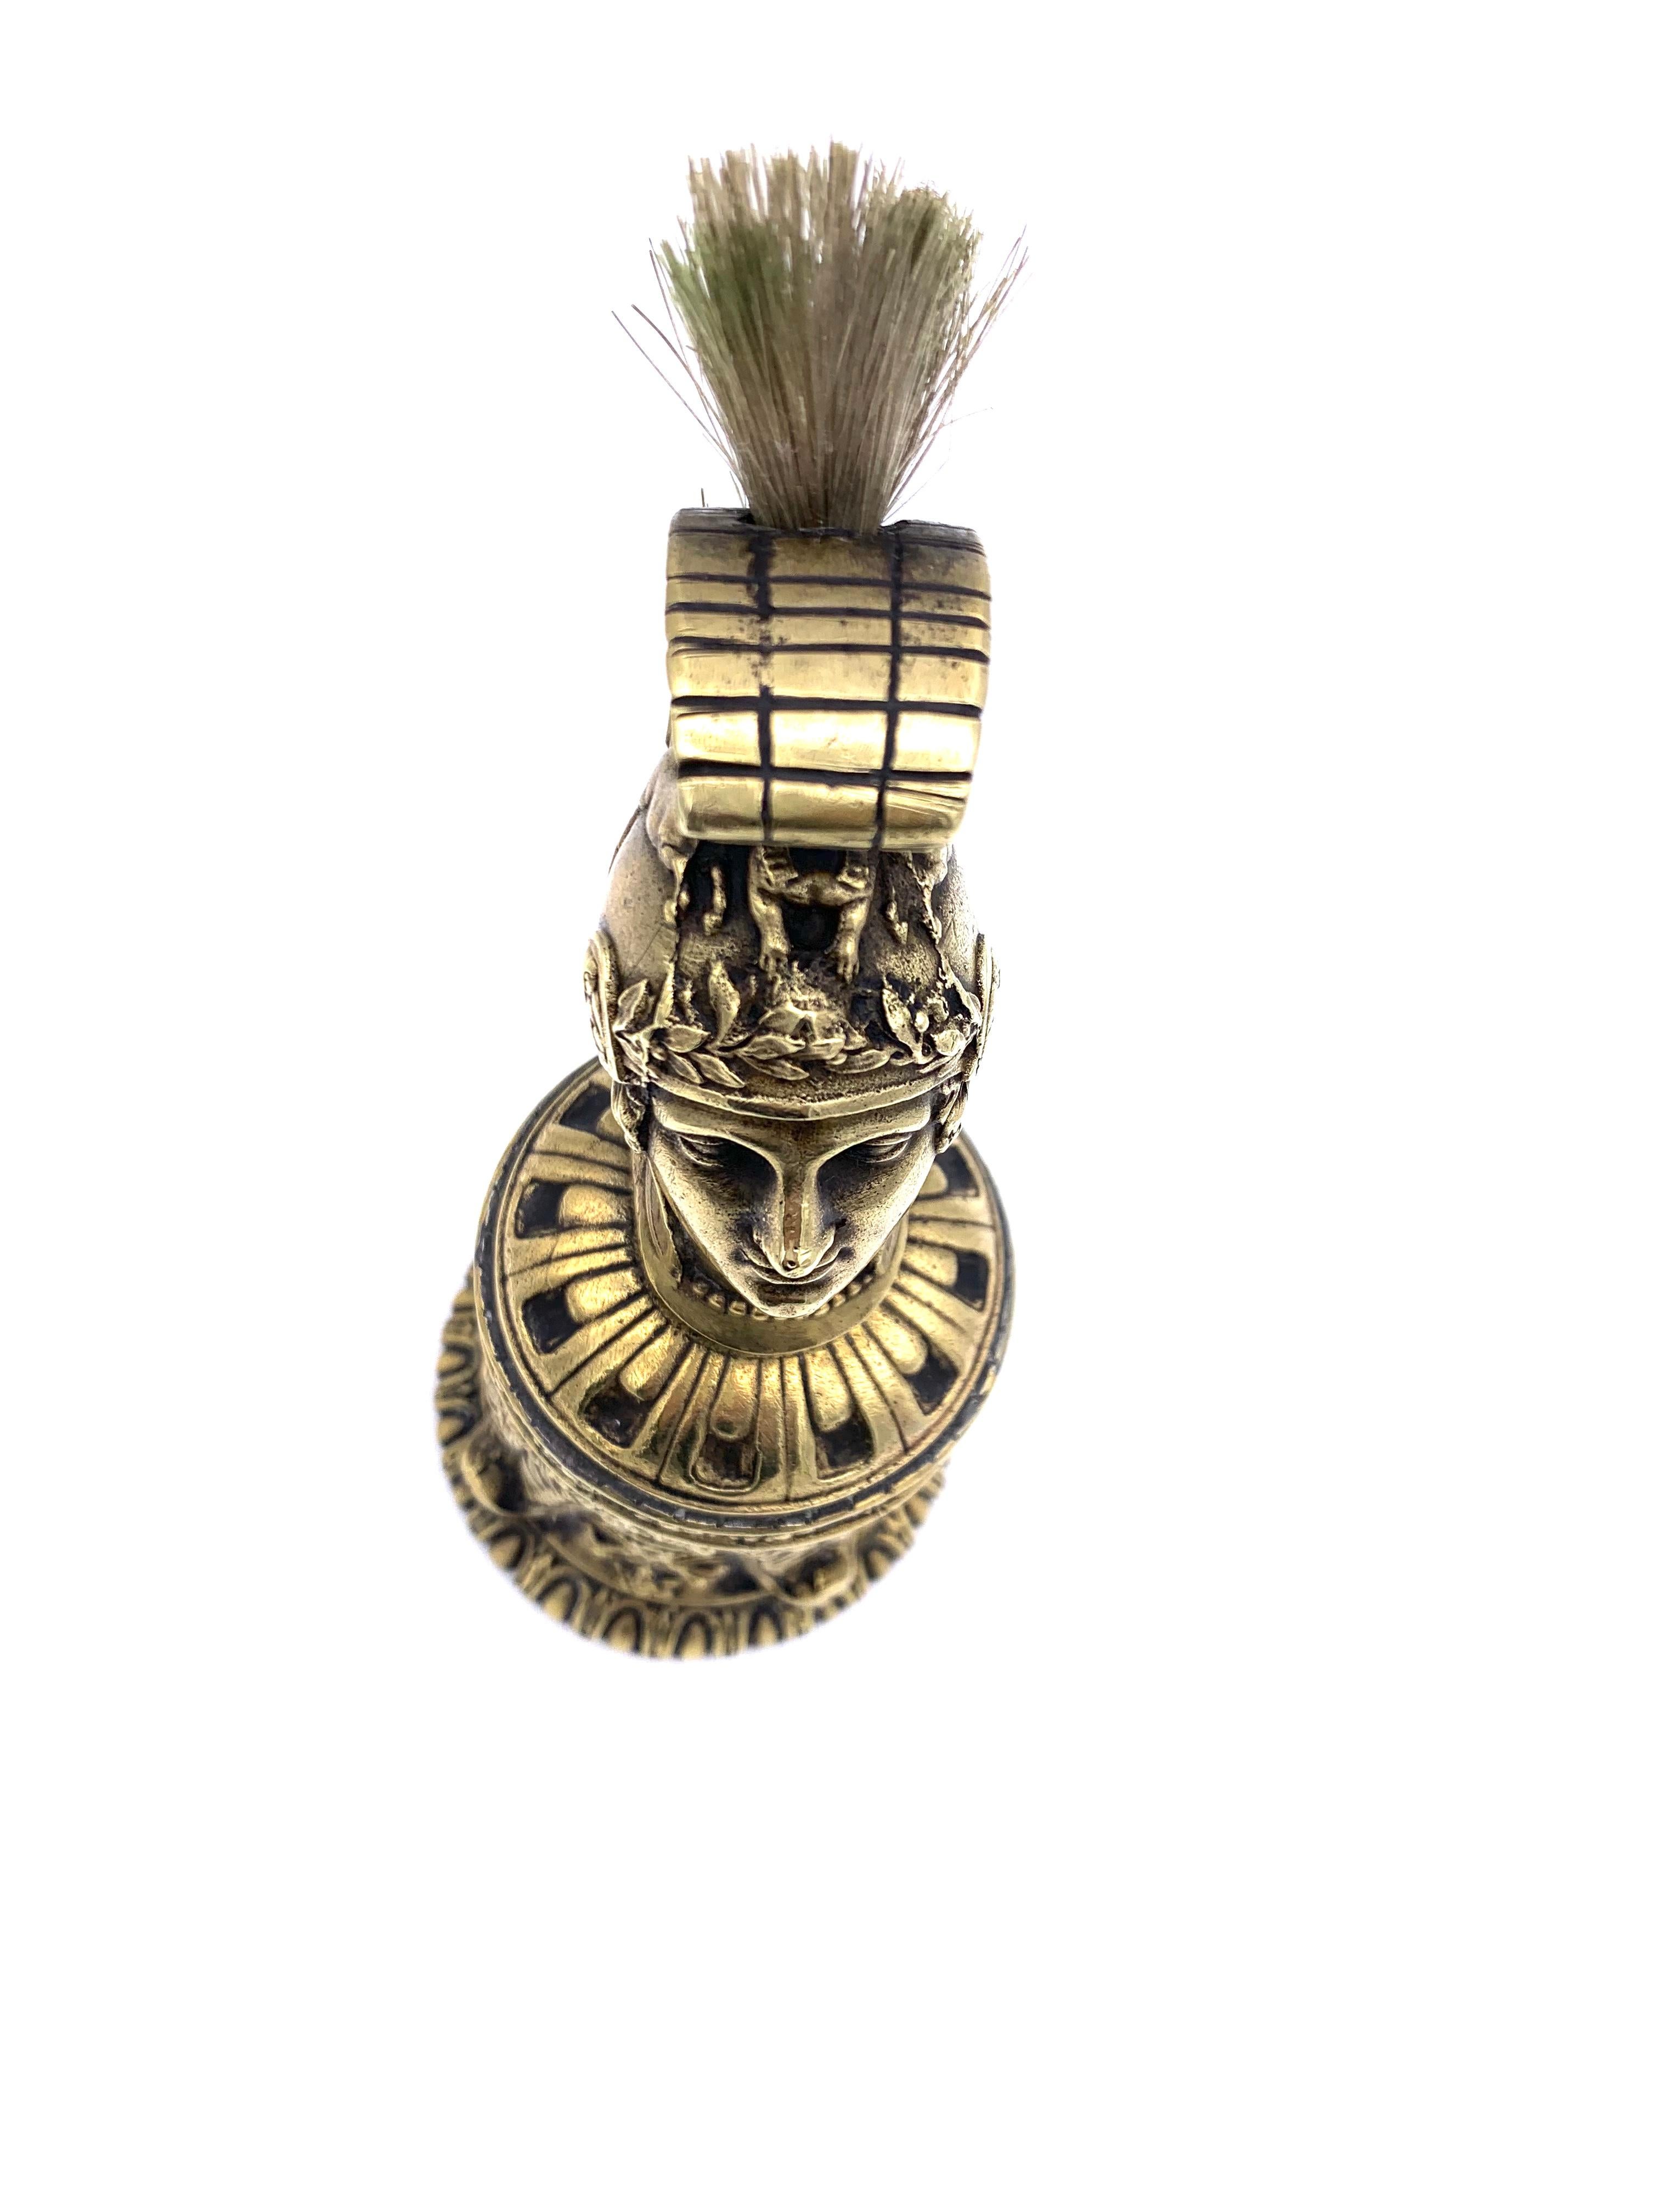 Highly unusual brush for cleaning fountain pens in the shape of a Roman charioteer. This outstanding object doubles also as a table bell with a doublefaced  clapper. The bell is made out of cast bronze 
with very fine detailing.
This object is a